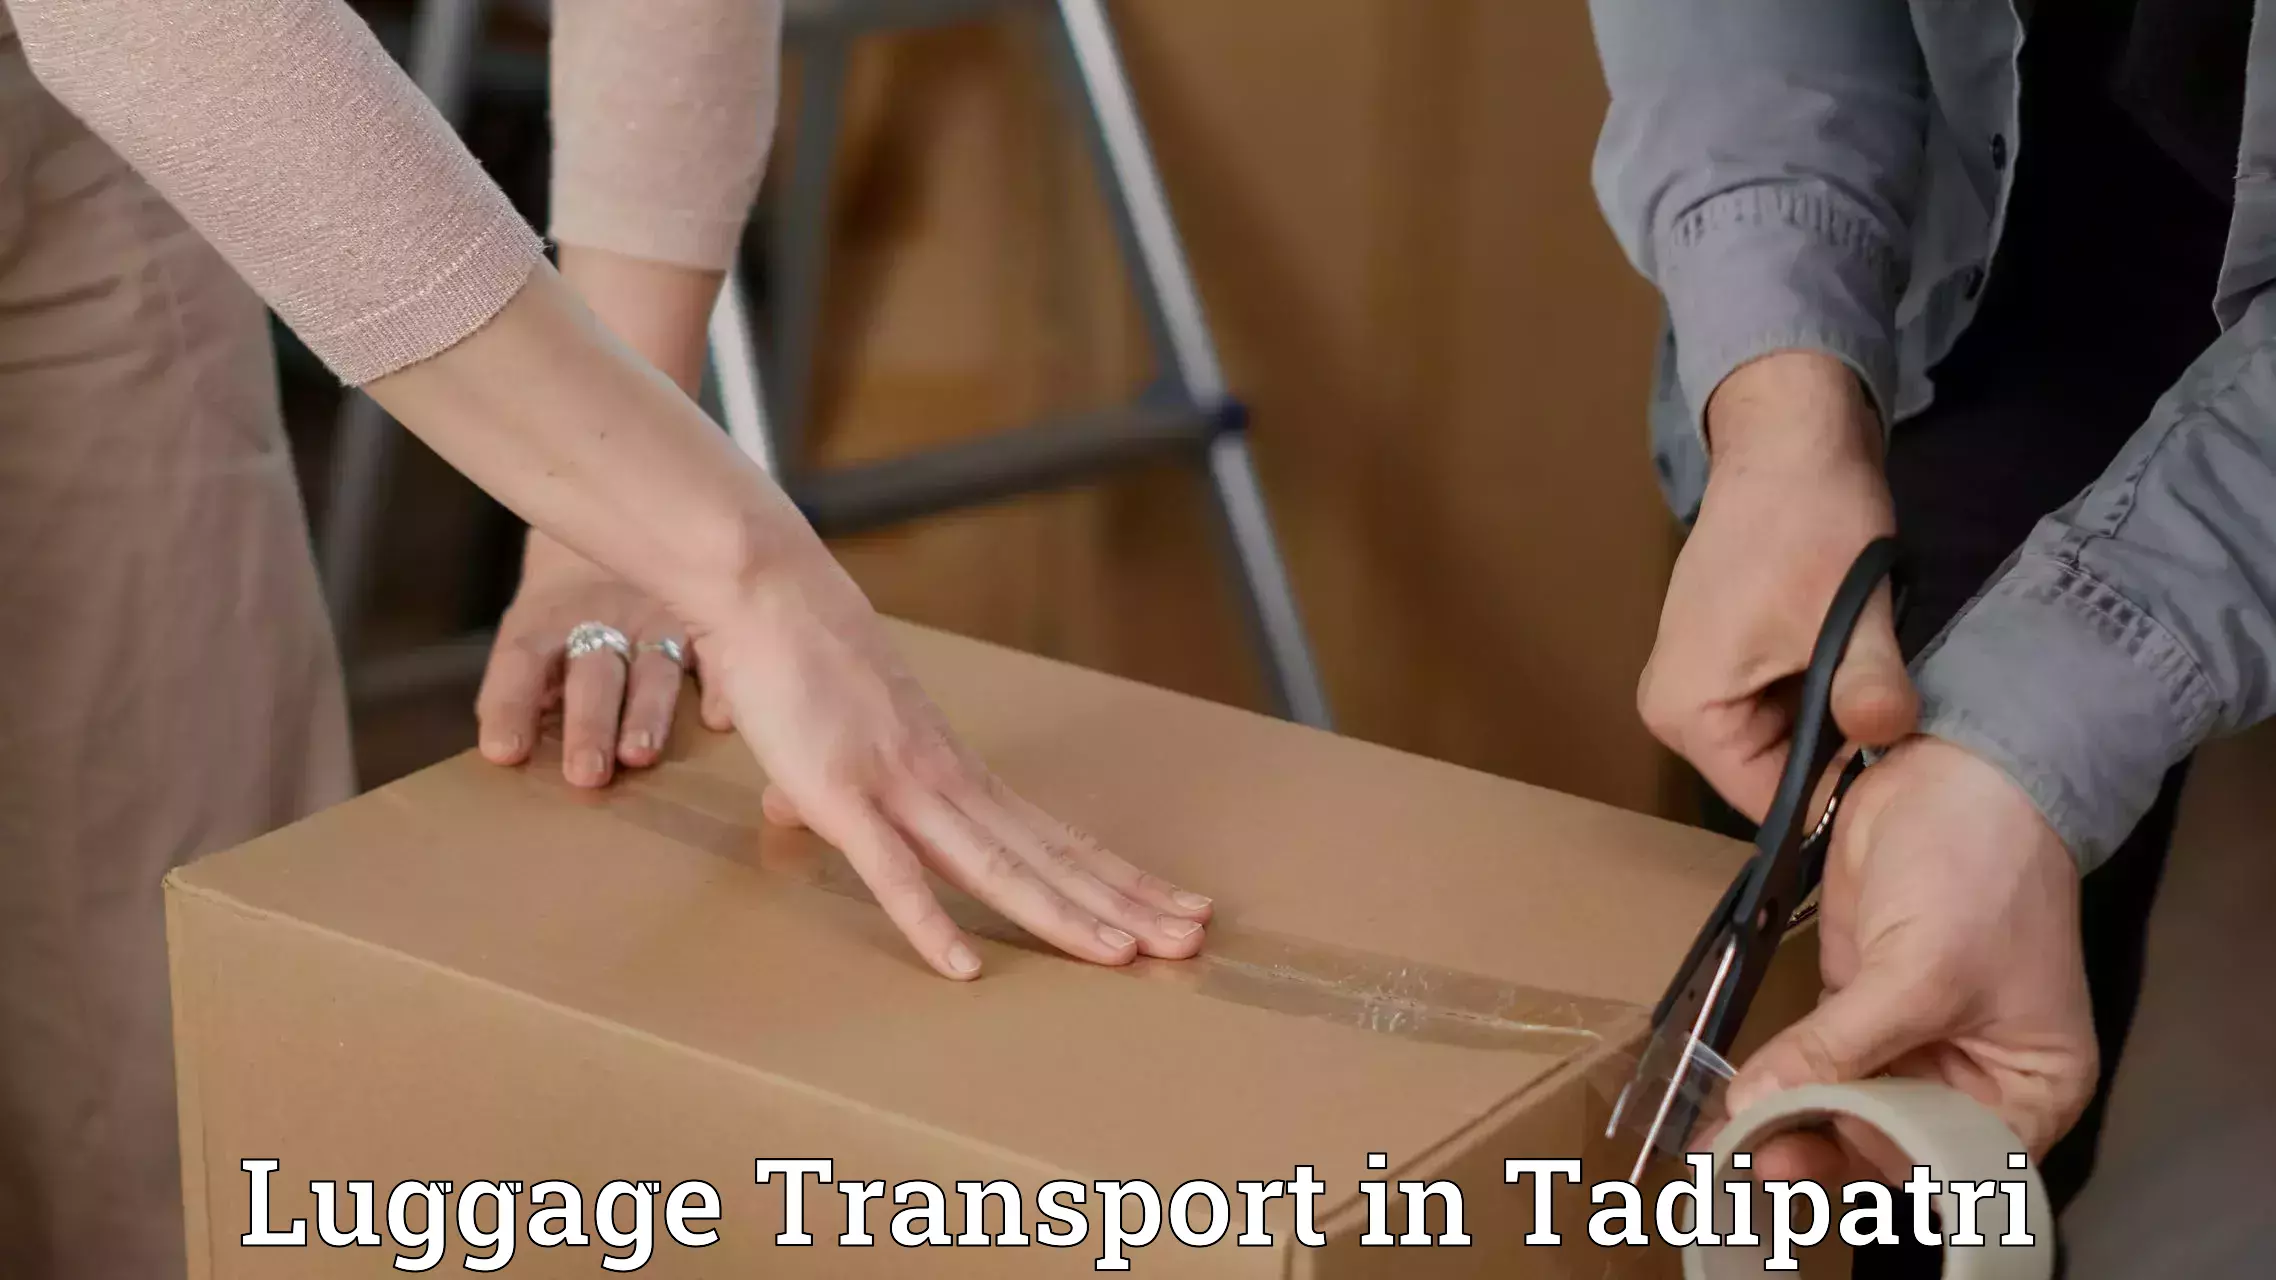 Luggage shipping specialists in Tadipatri